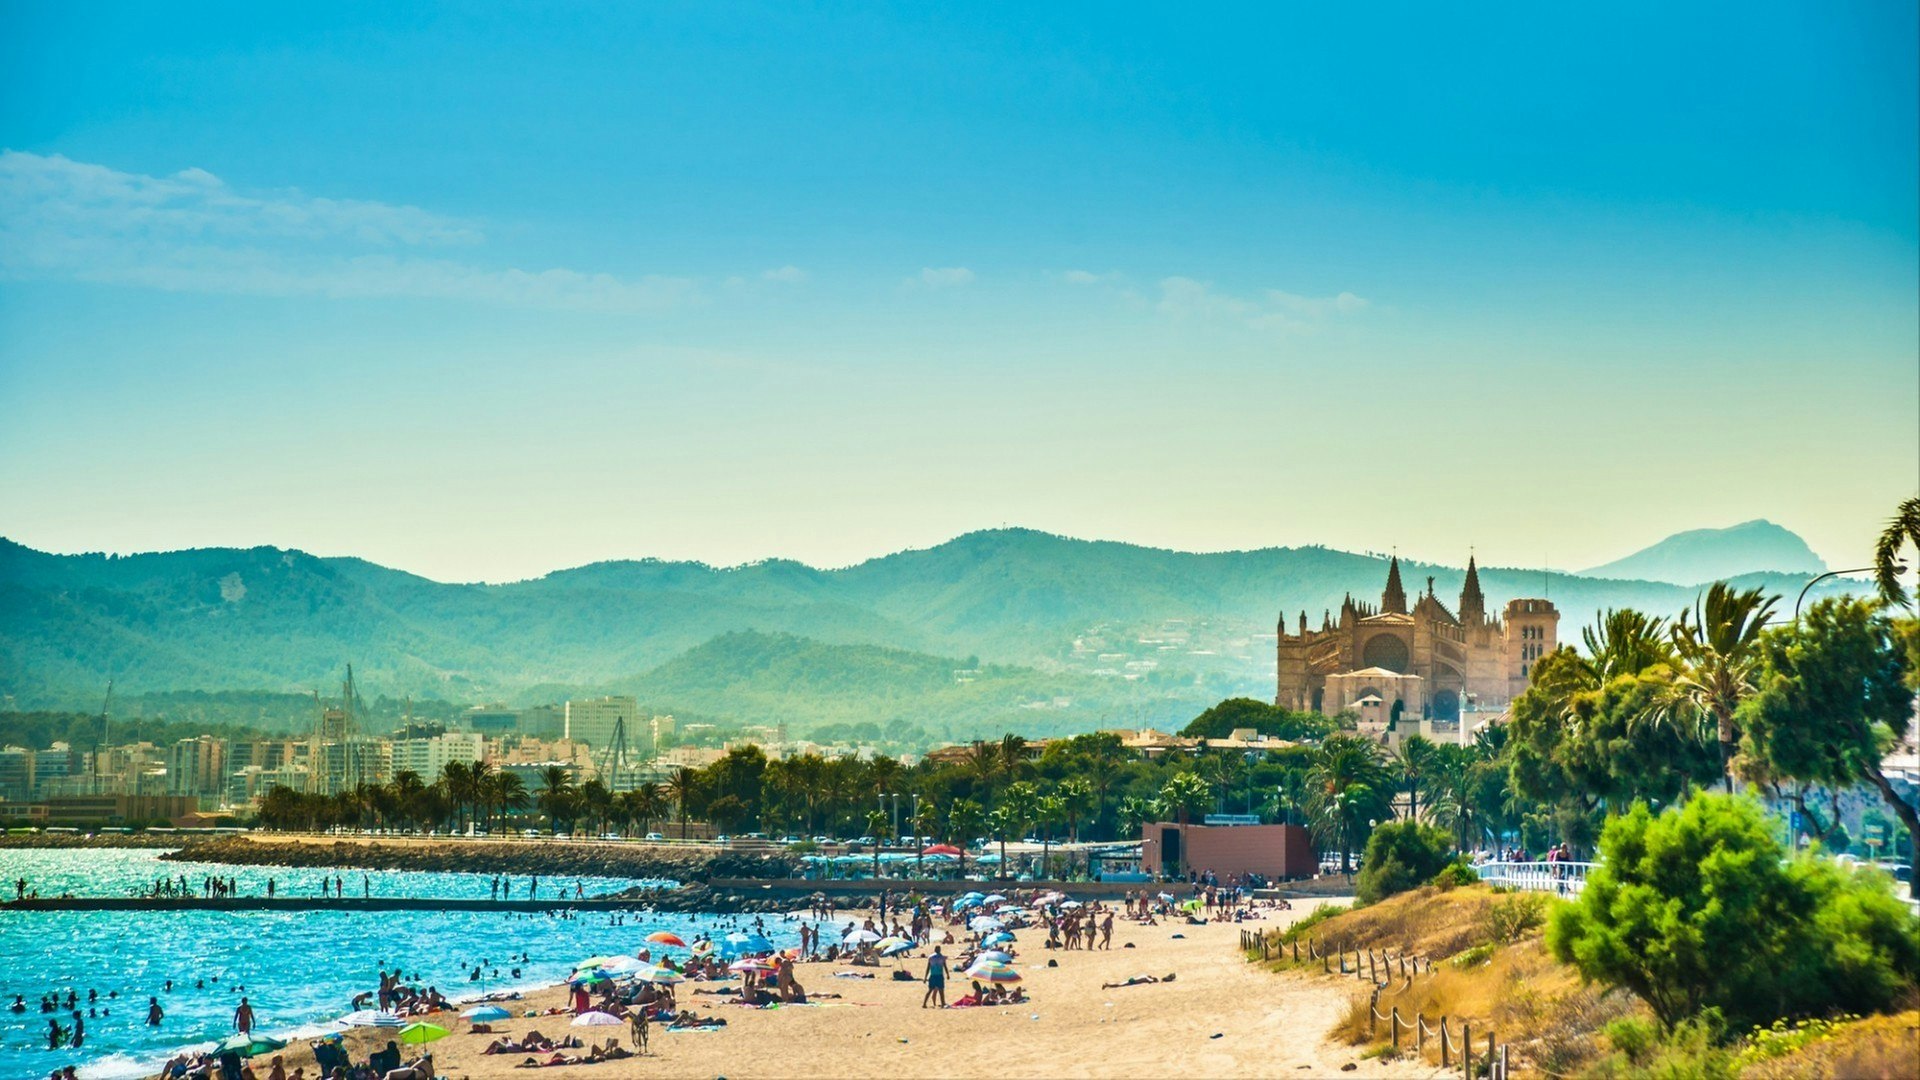 View of the beach of Palma de Mallorca with people lying on sand and the gorgeous cathedral building visible in background